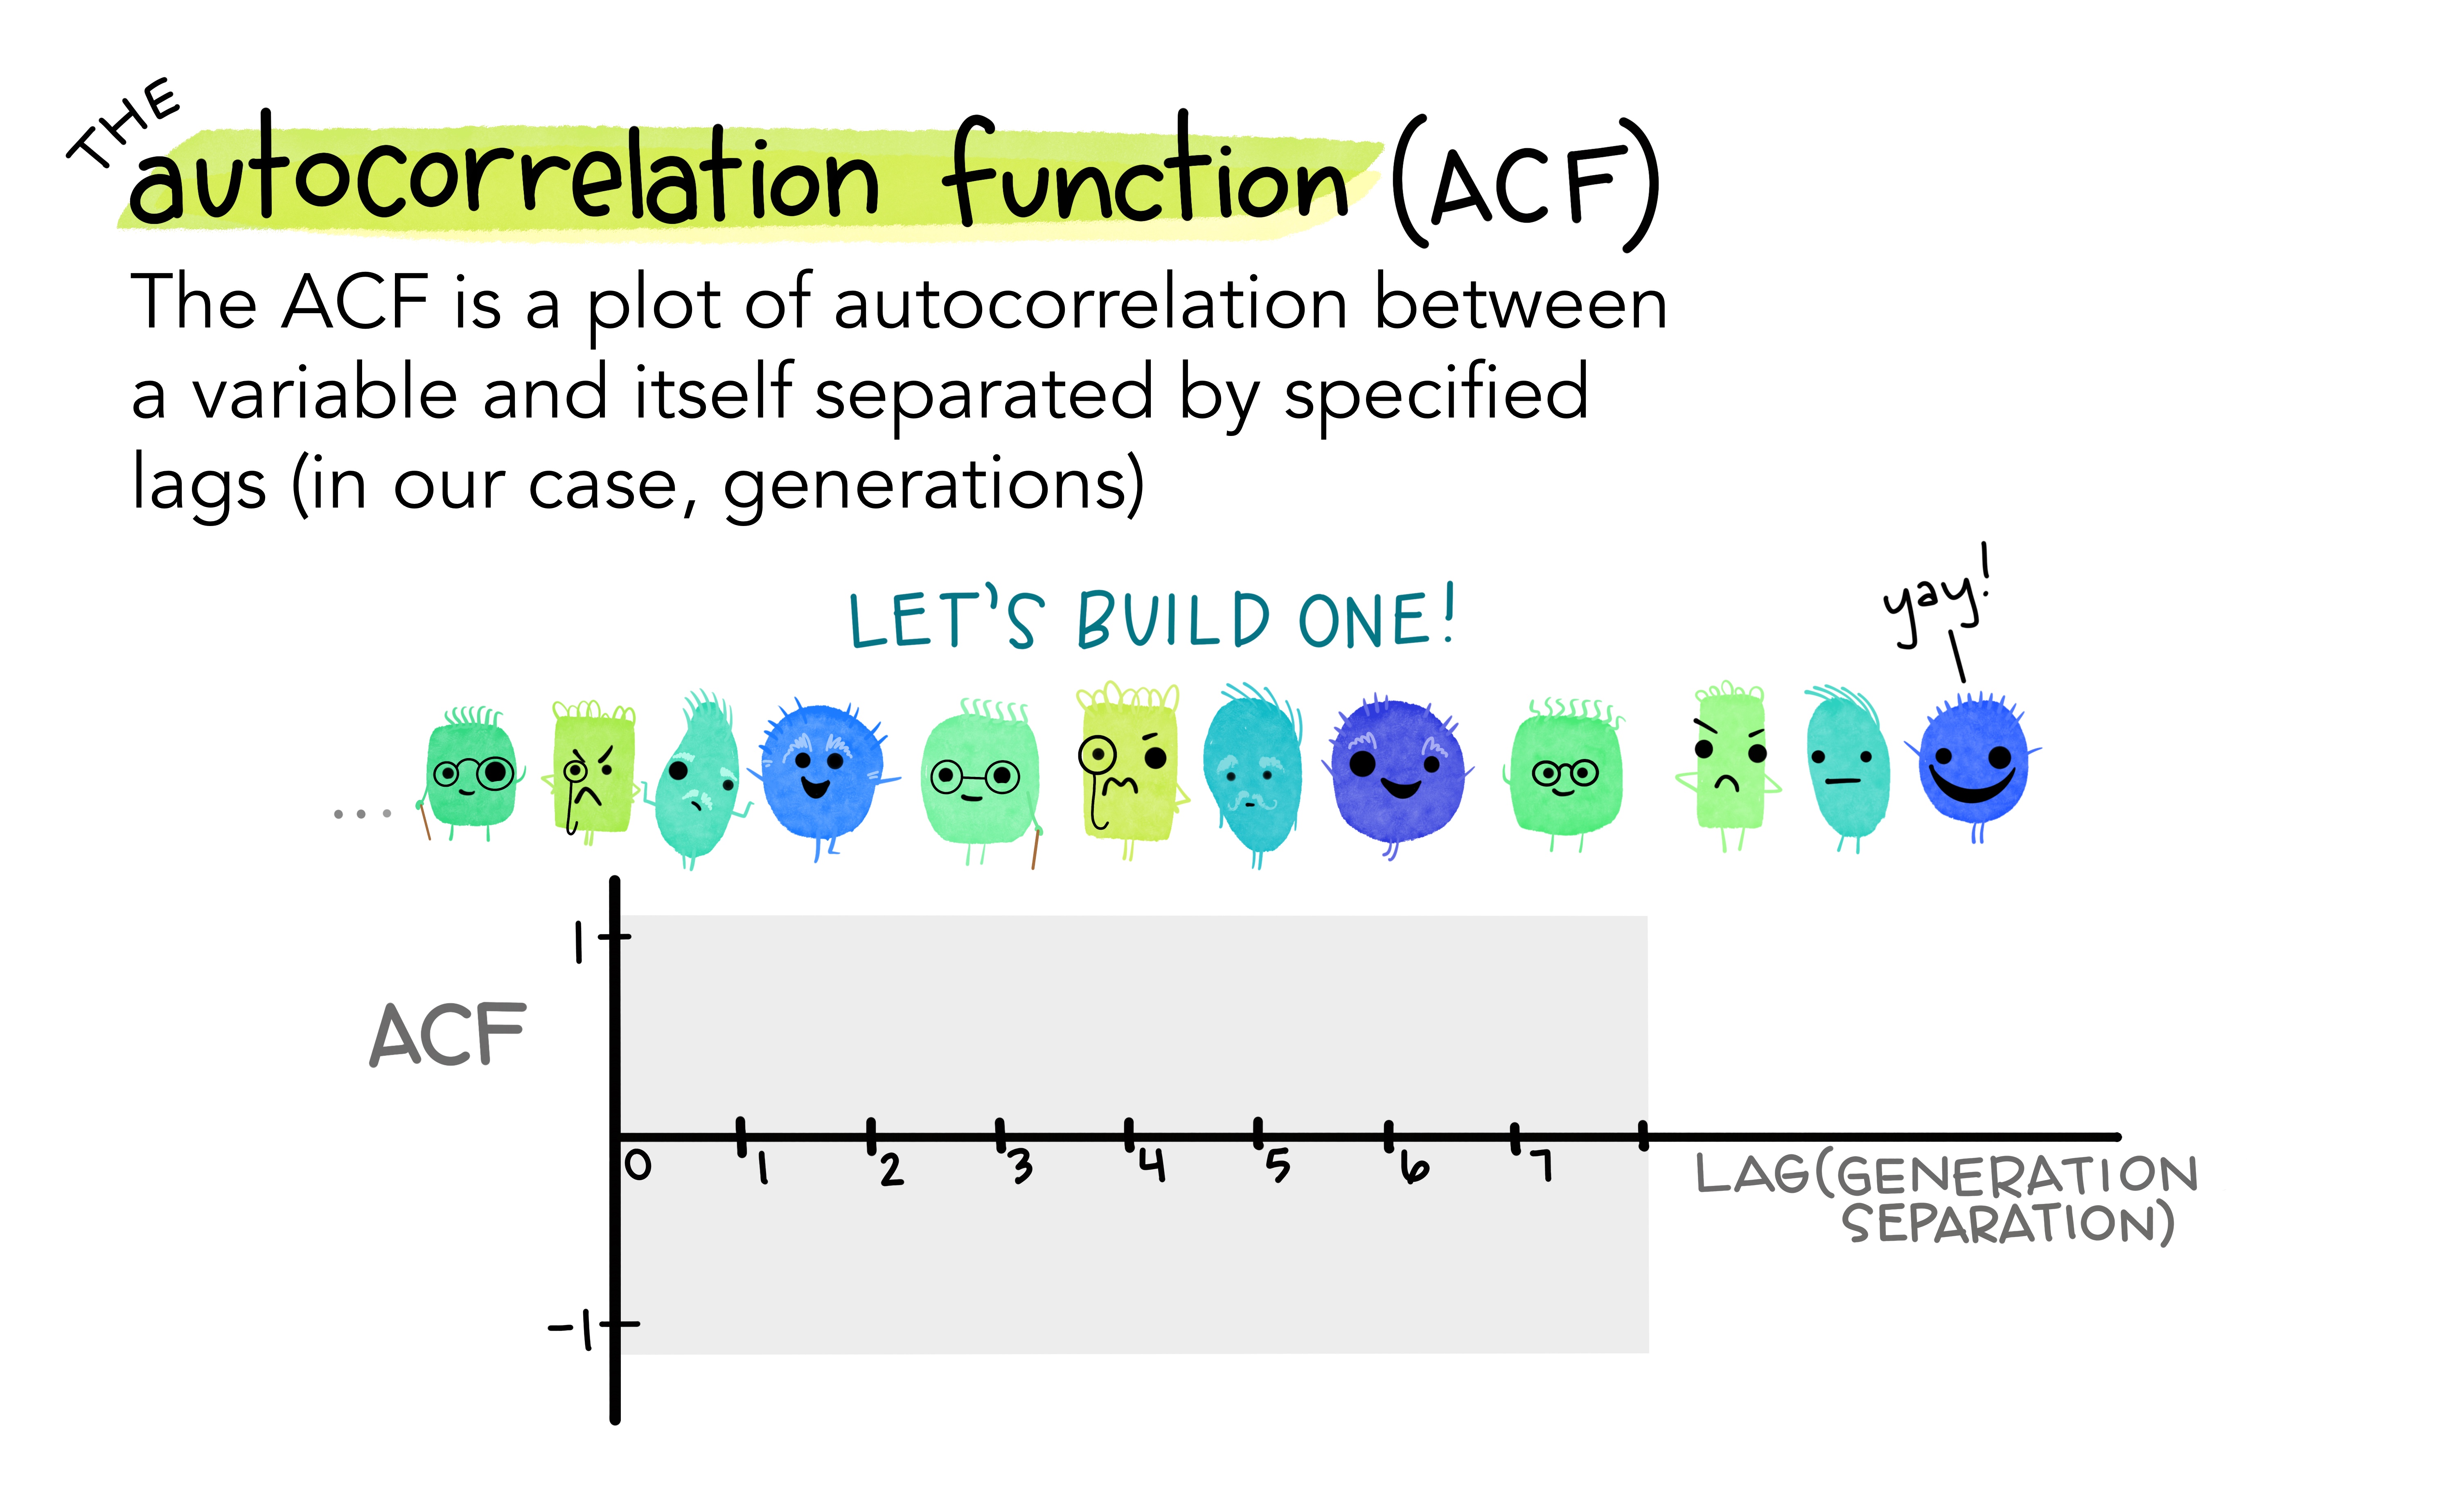 A long series of friendly looking monsters representing generations in their family, of varying shape and color. Those separated by 4 generations are very similar in shape and color. Those separated by two generations are very dissimilar in shape and color. Text reads: “The autocorrelation function (ACF) is a plot of autocorrelation between a variable and itself separated by specified lags (in our case, generations). Let’s build one!” There is an empty plot area below.